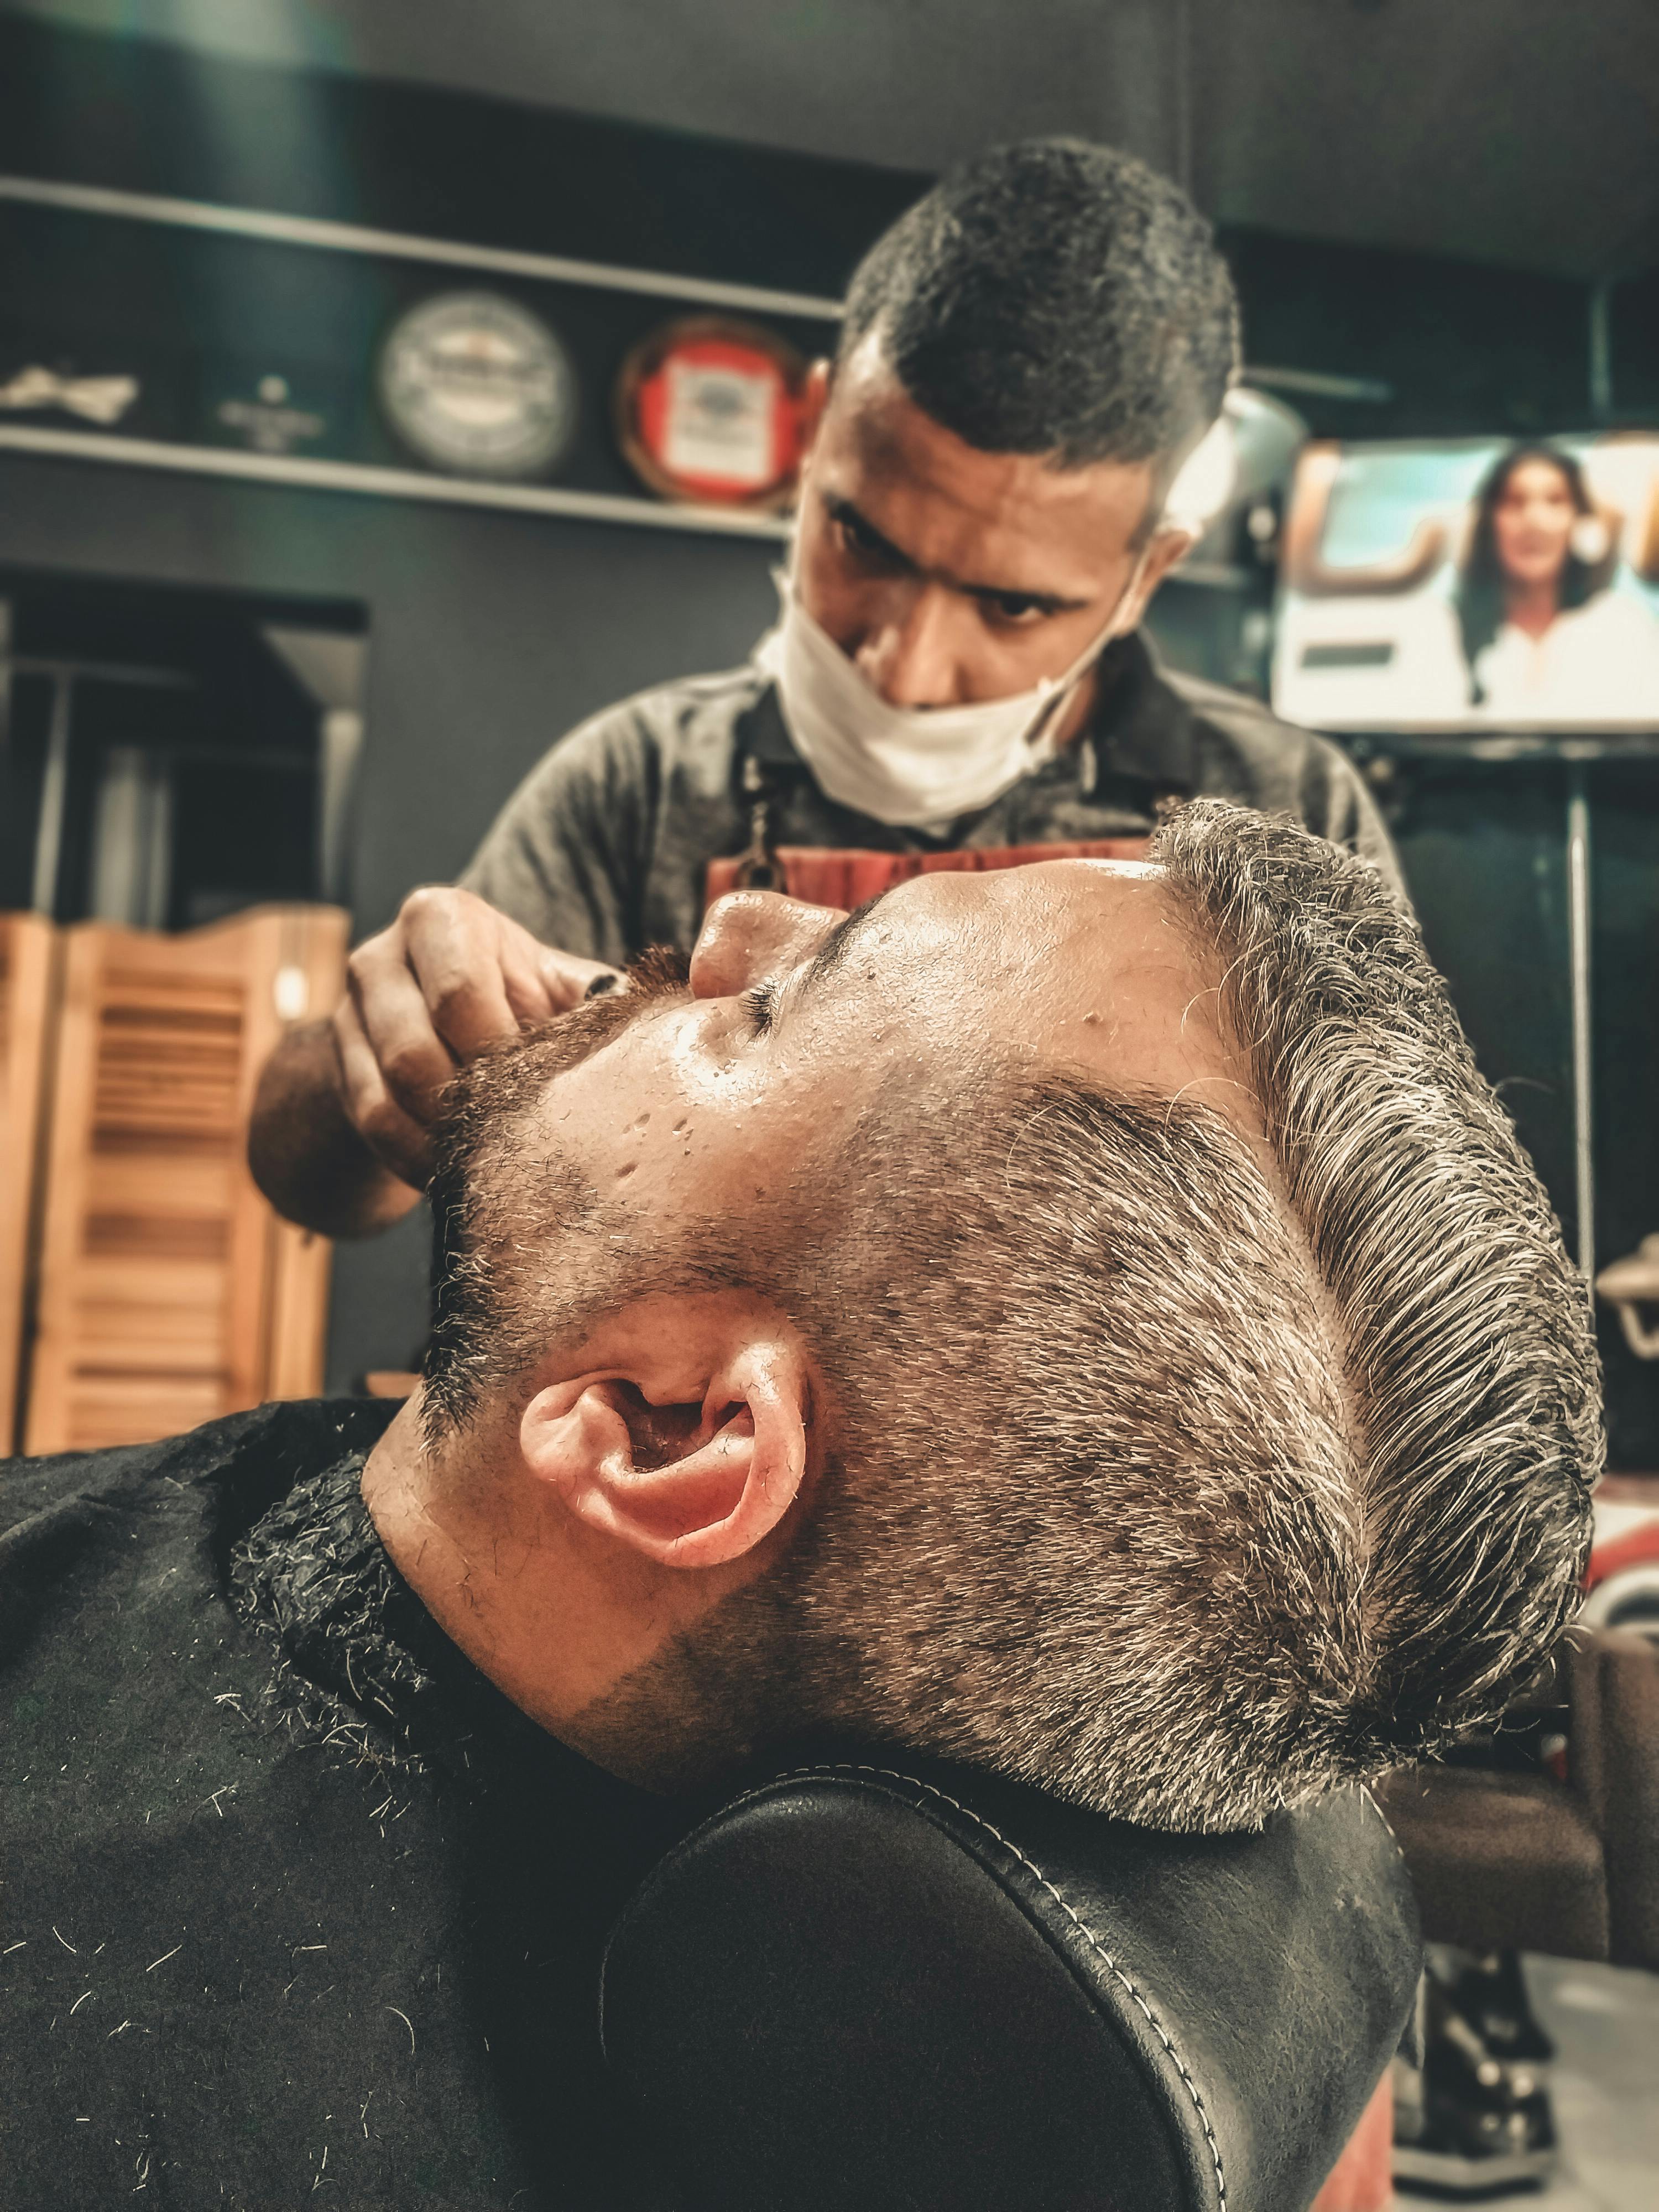 Barber Shop Photos Download The BEST Free Barber Shop Stock Photos  HD  Images